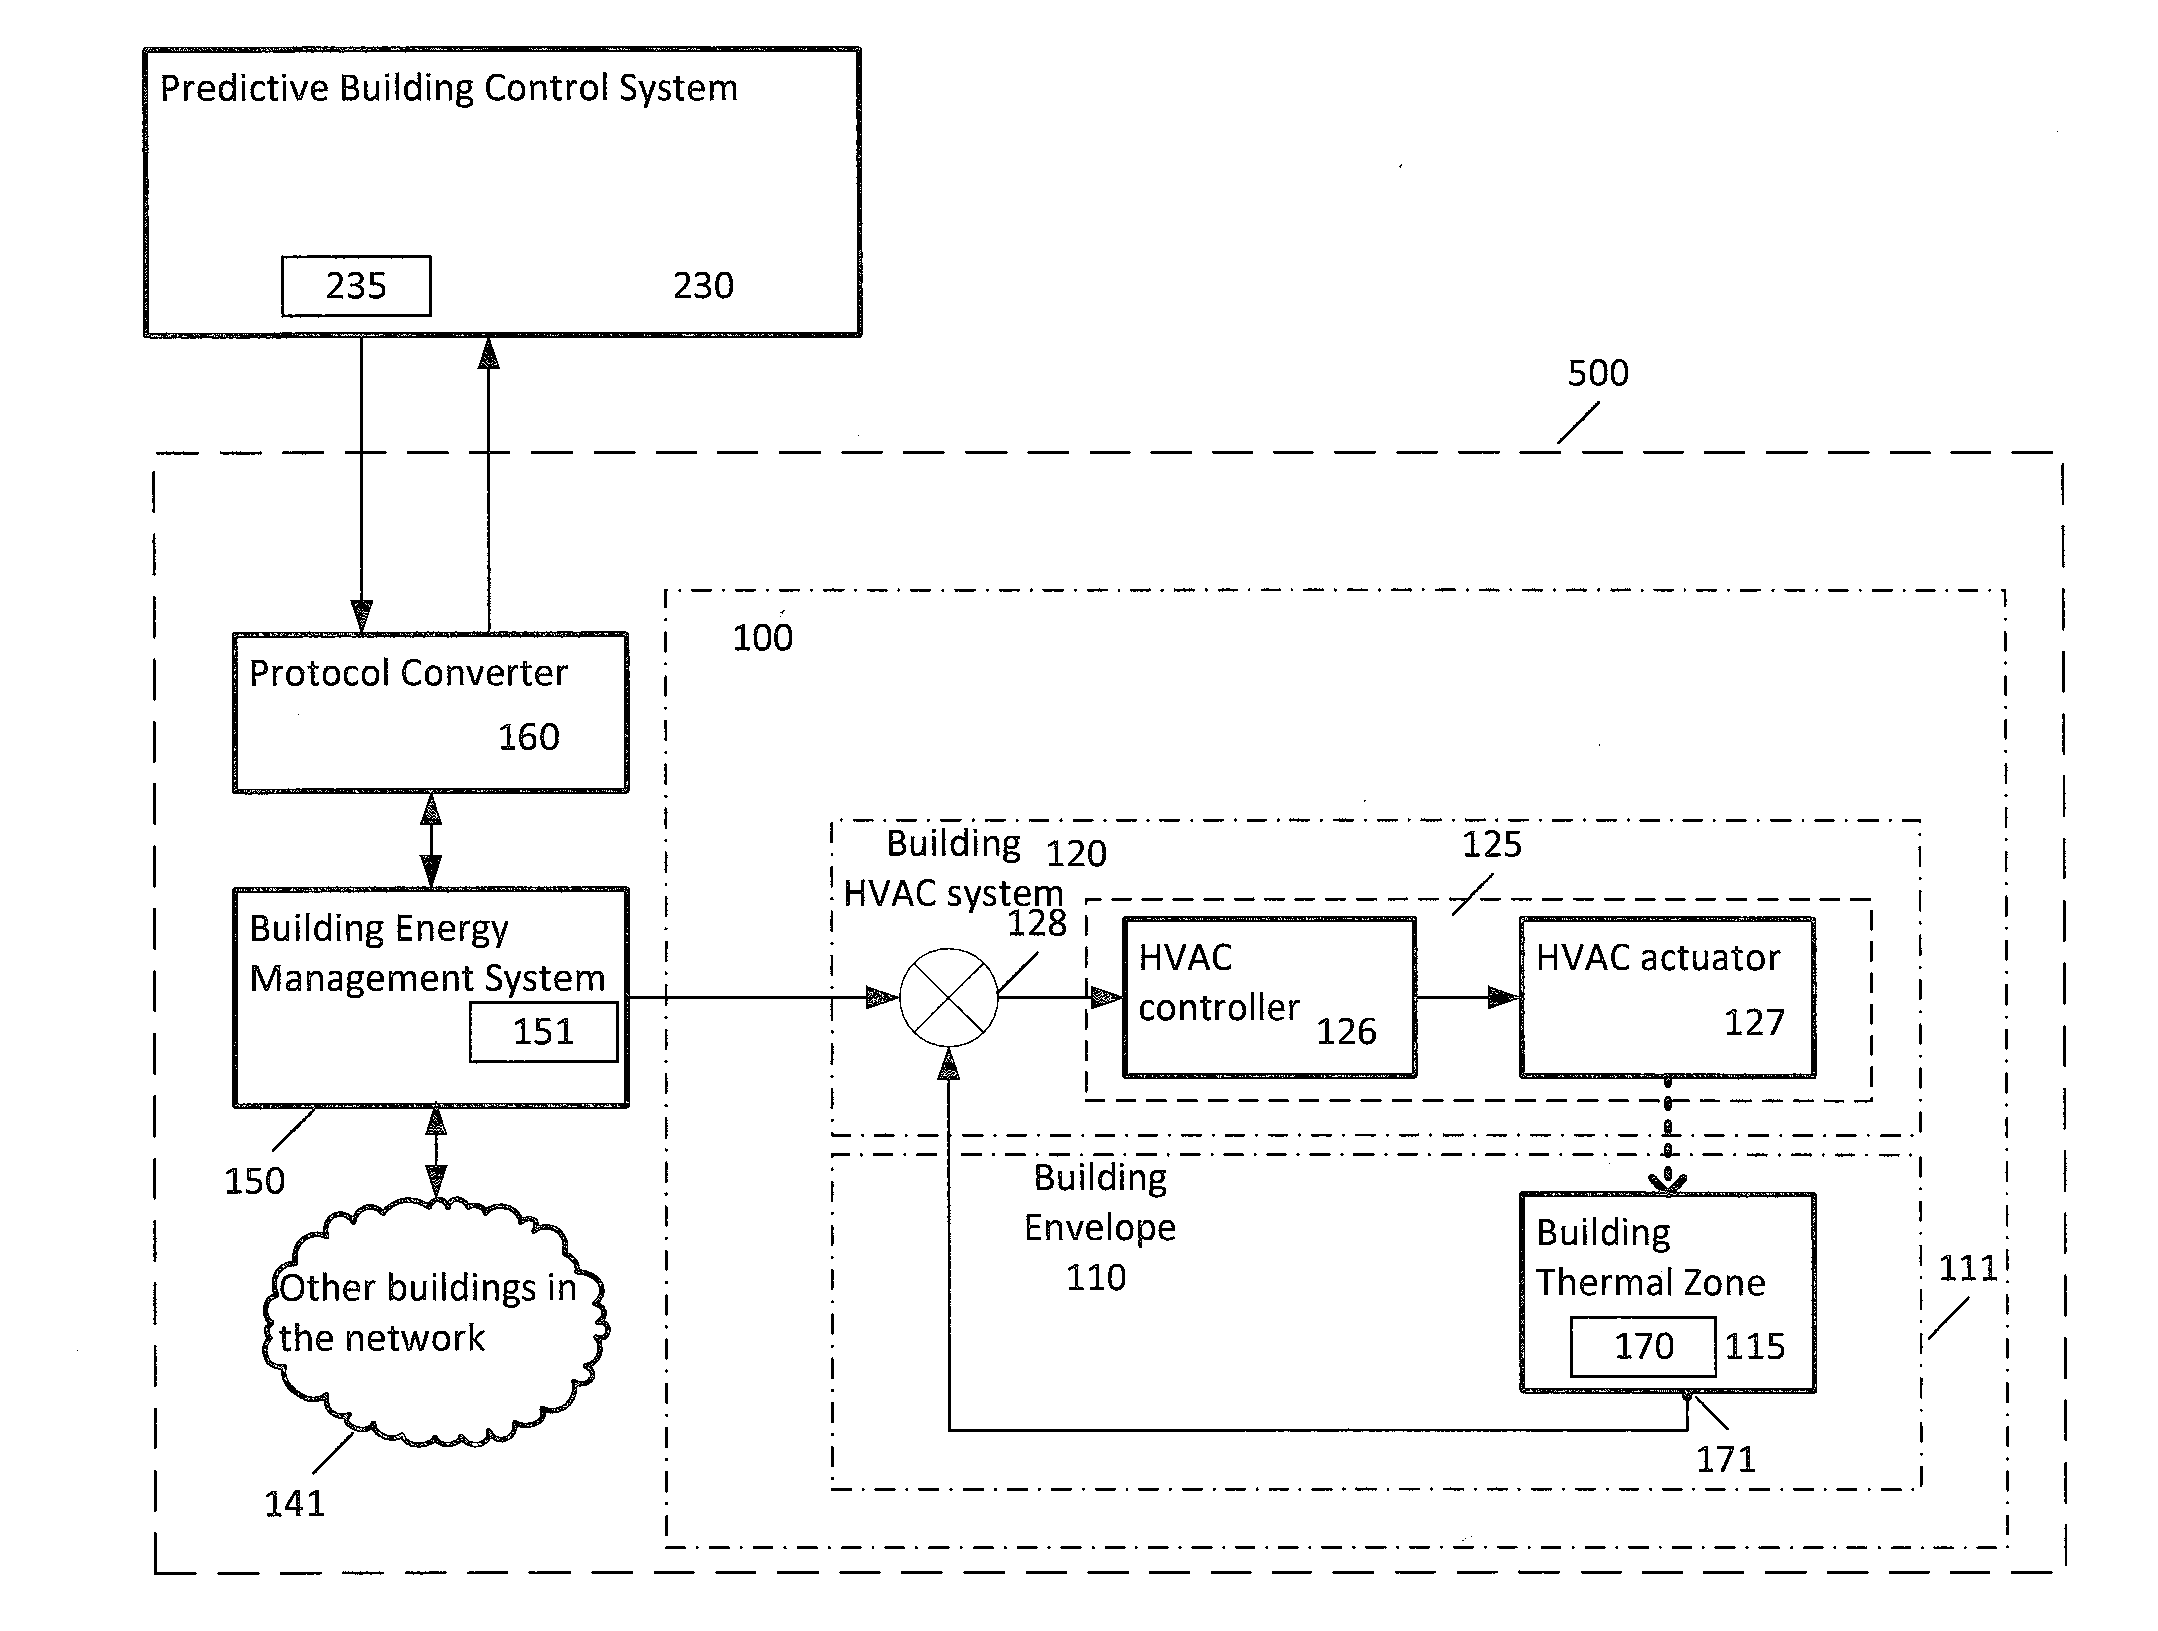 Predictive building control system and method for optimizing energy use and thermal comfort for a building or network of buildings